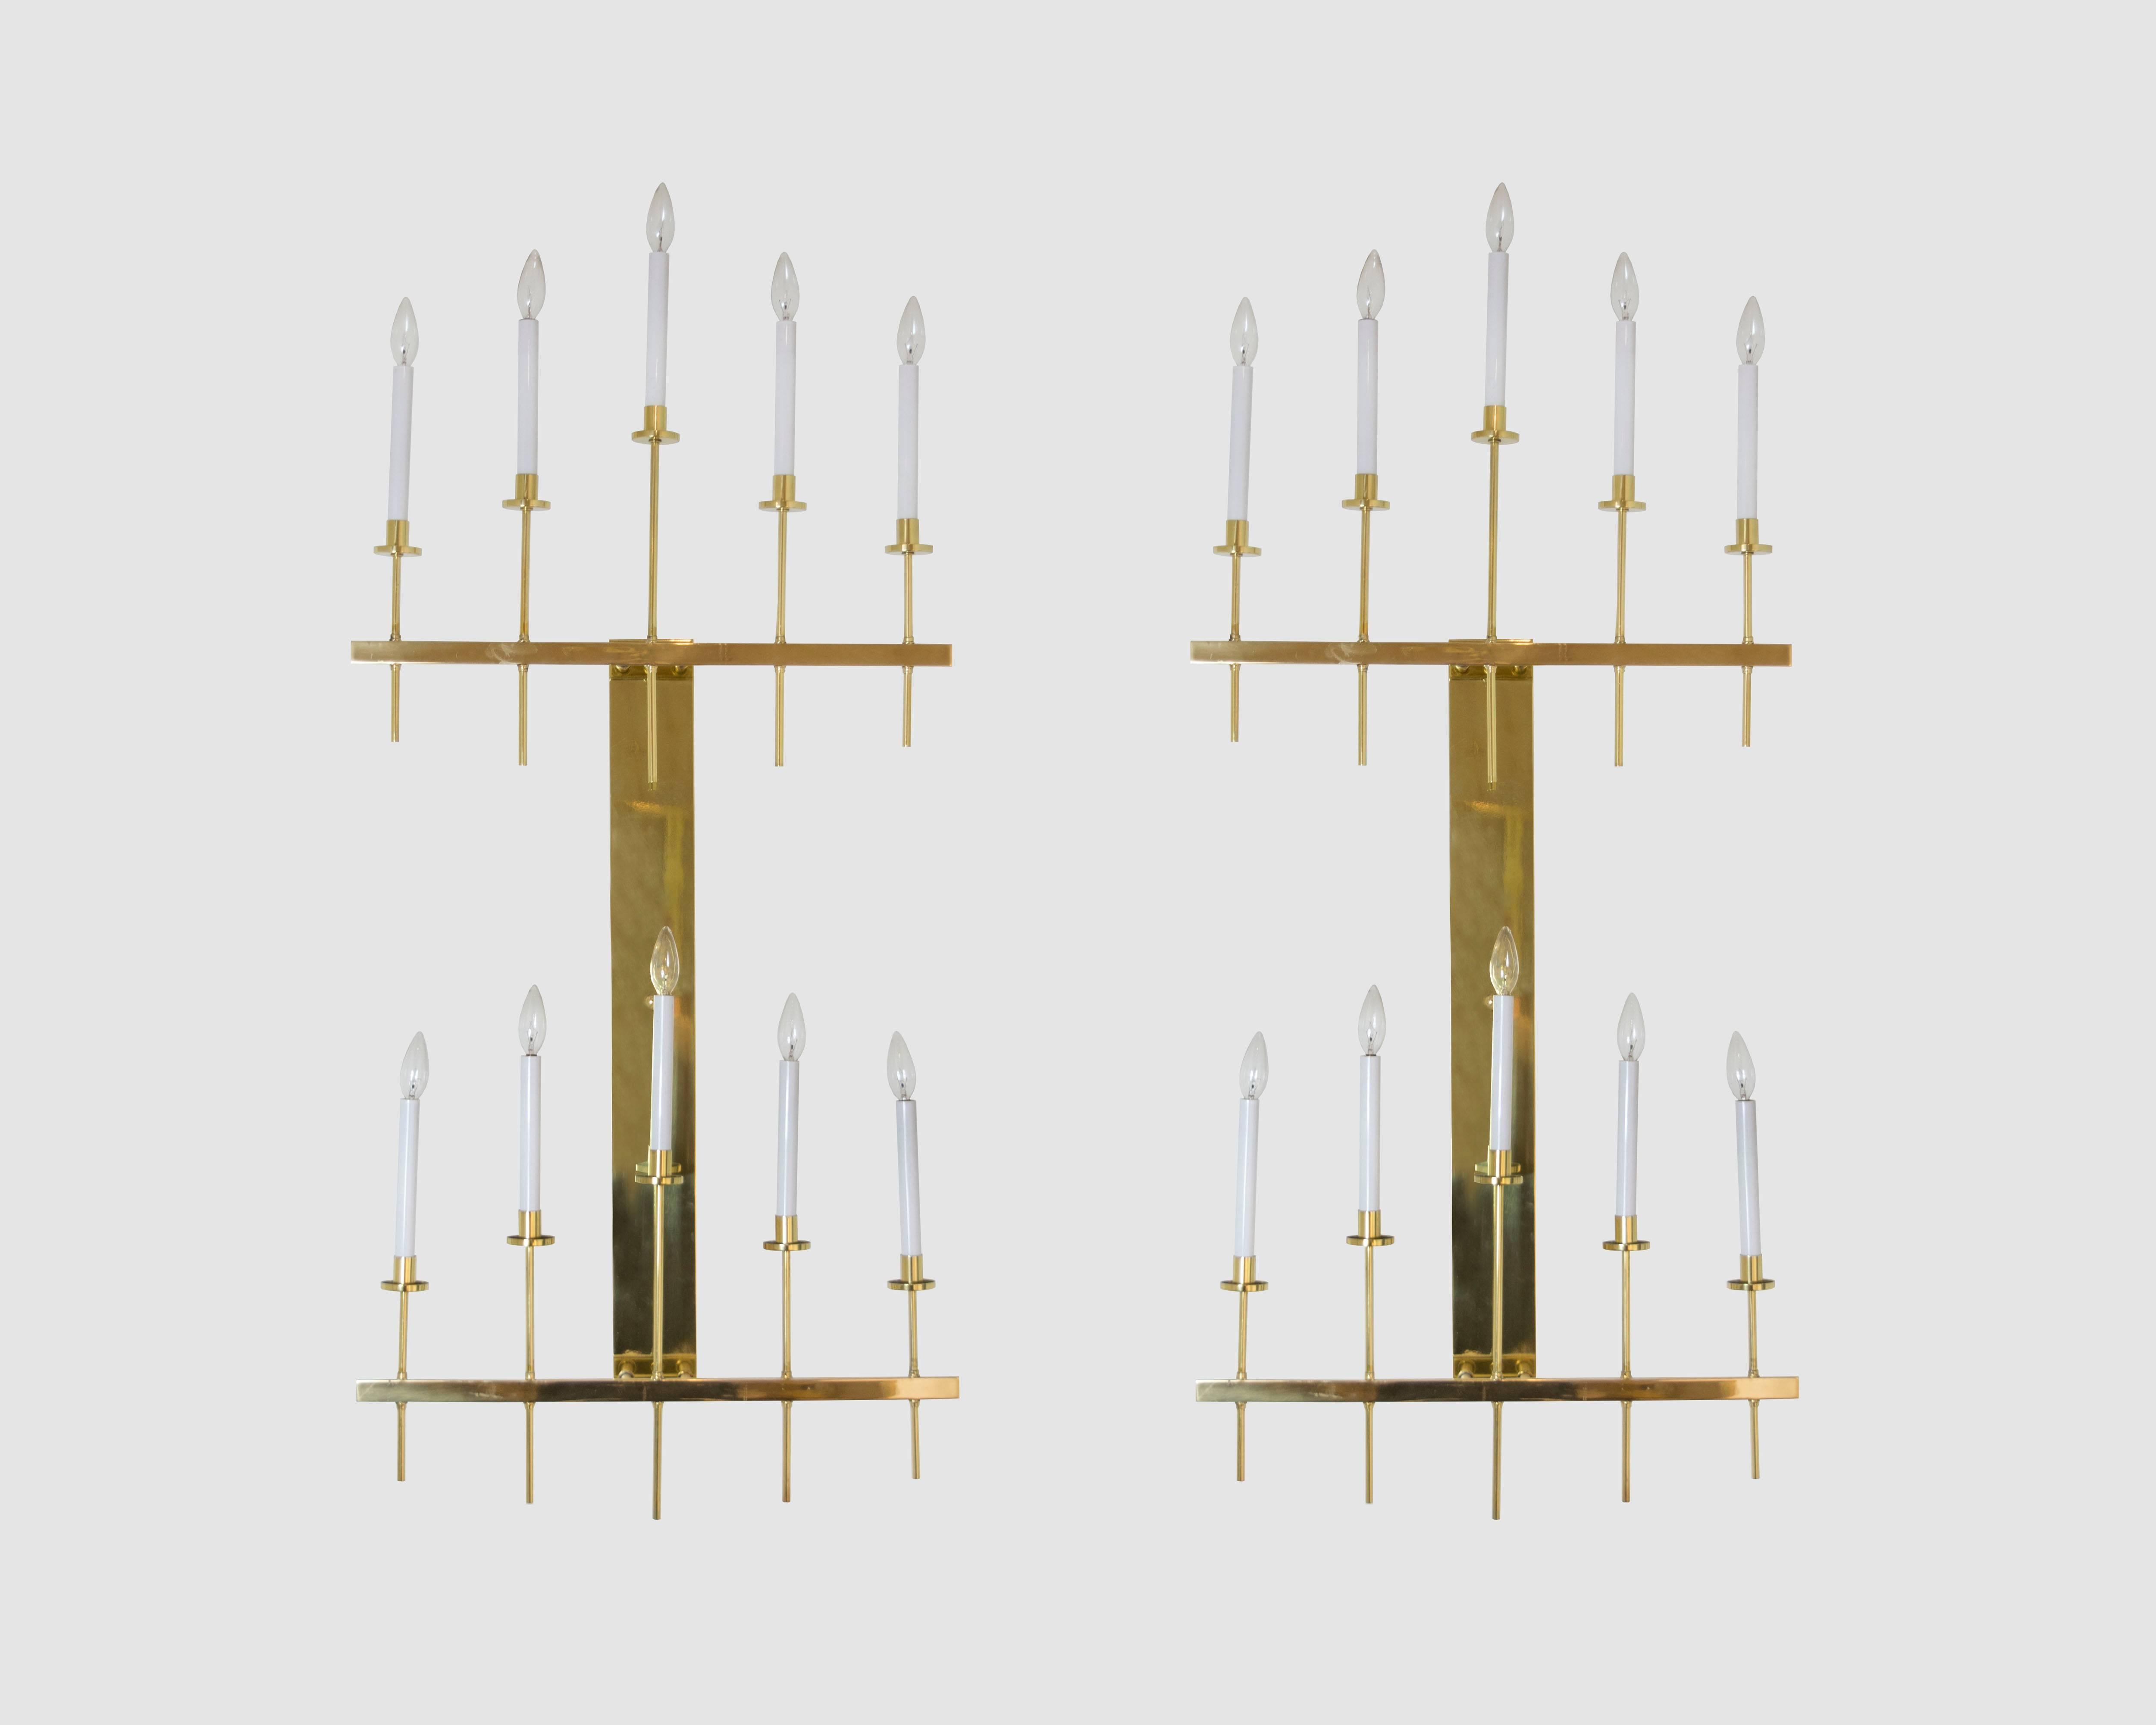 Enormous 4' long pair of brass vintage wall sconces in the style of Parzinger/Ponti.